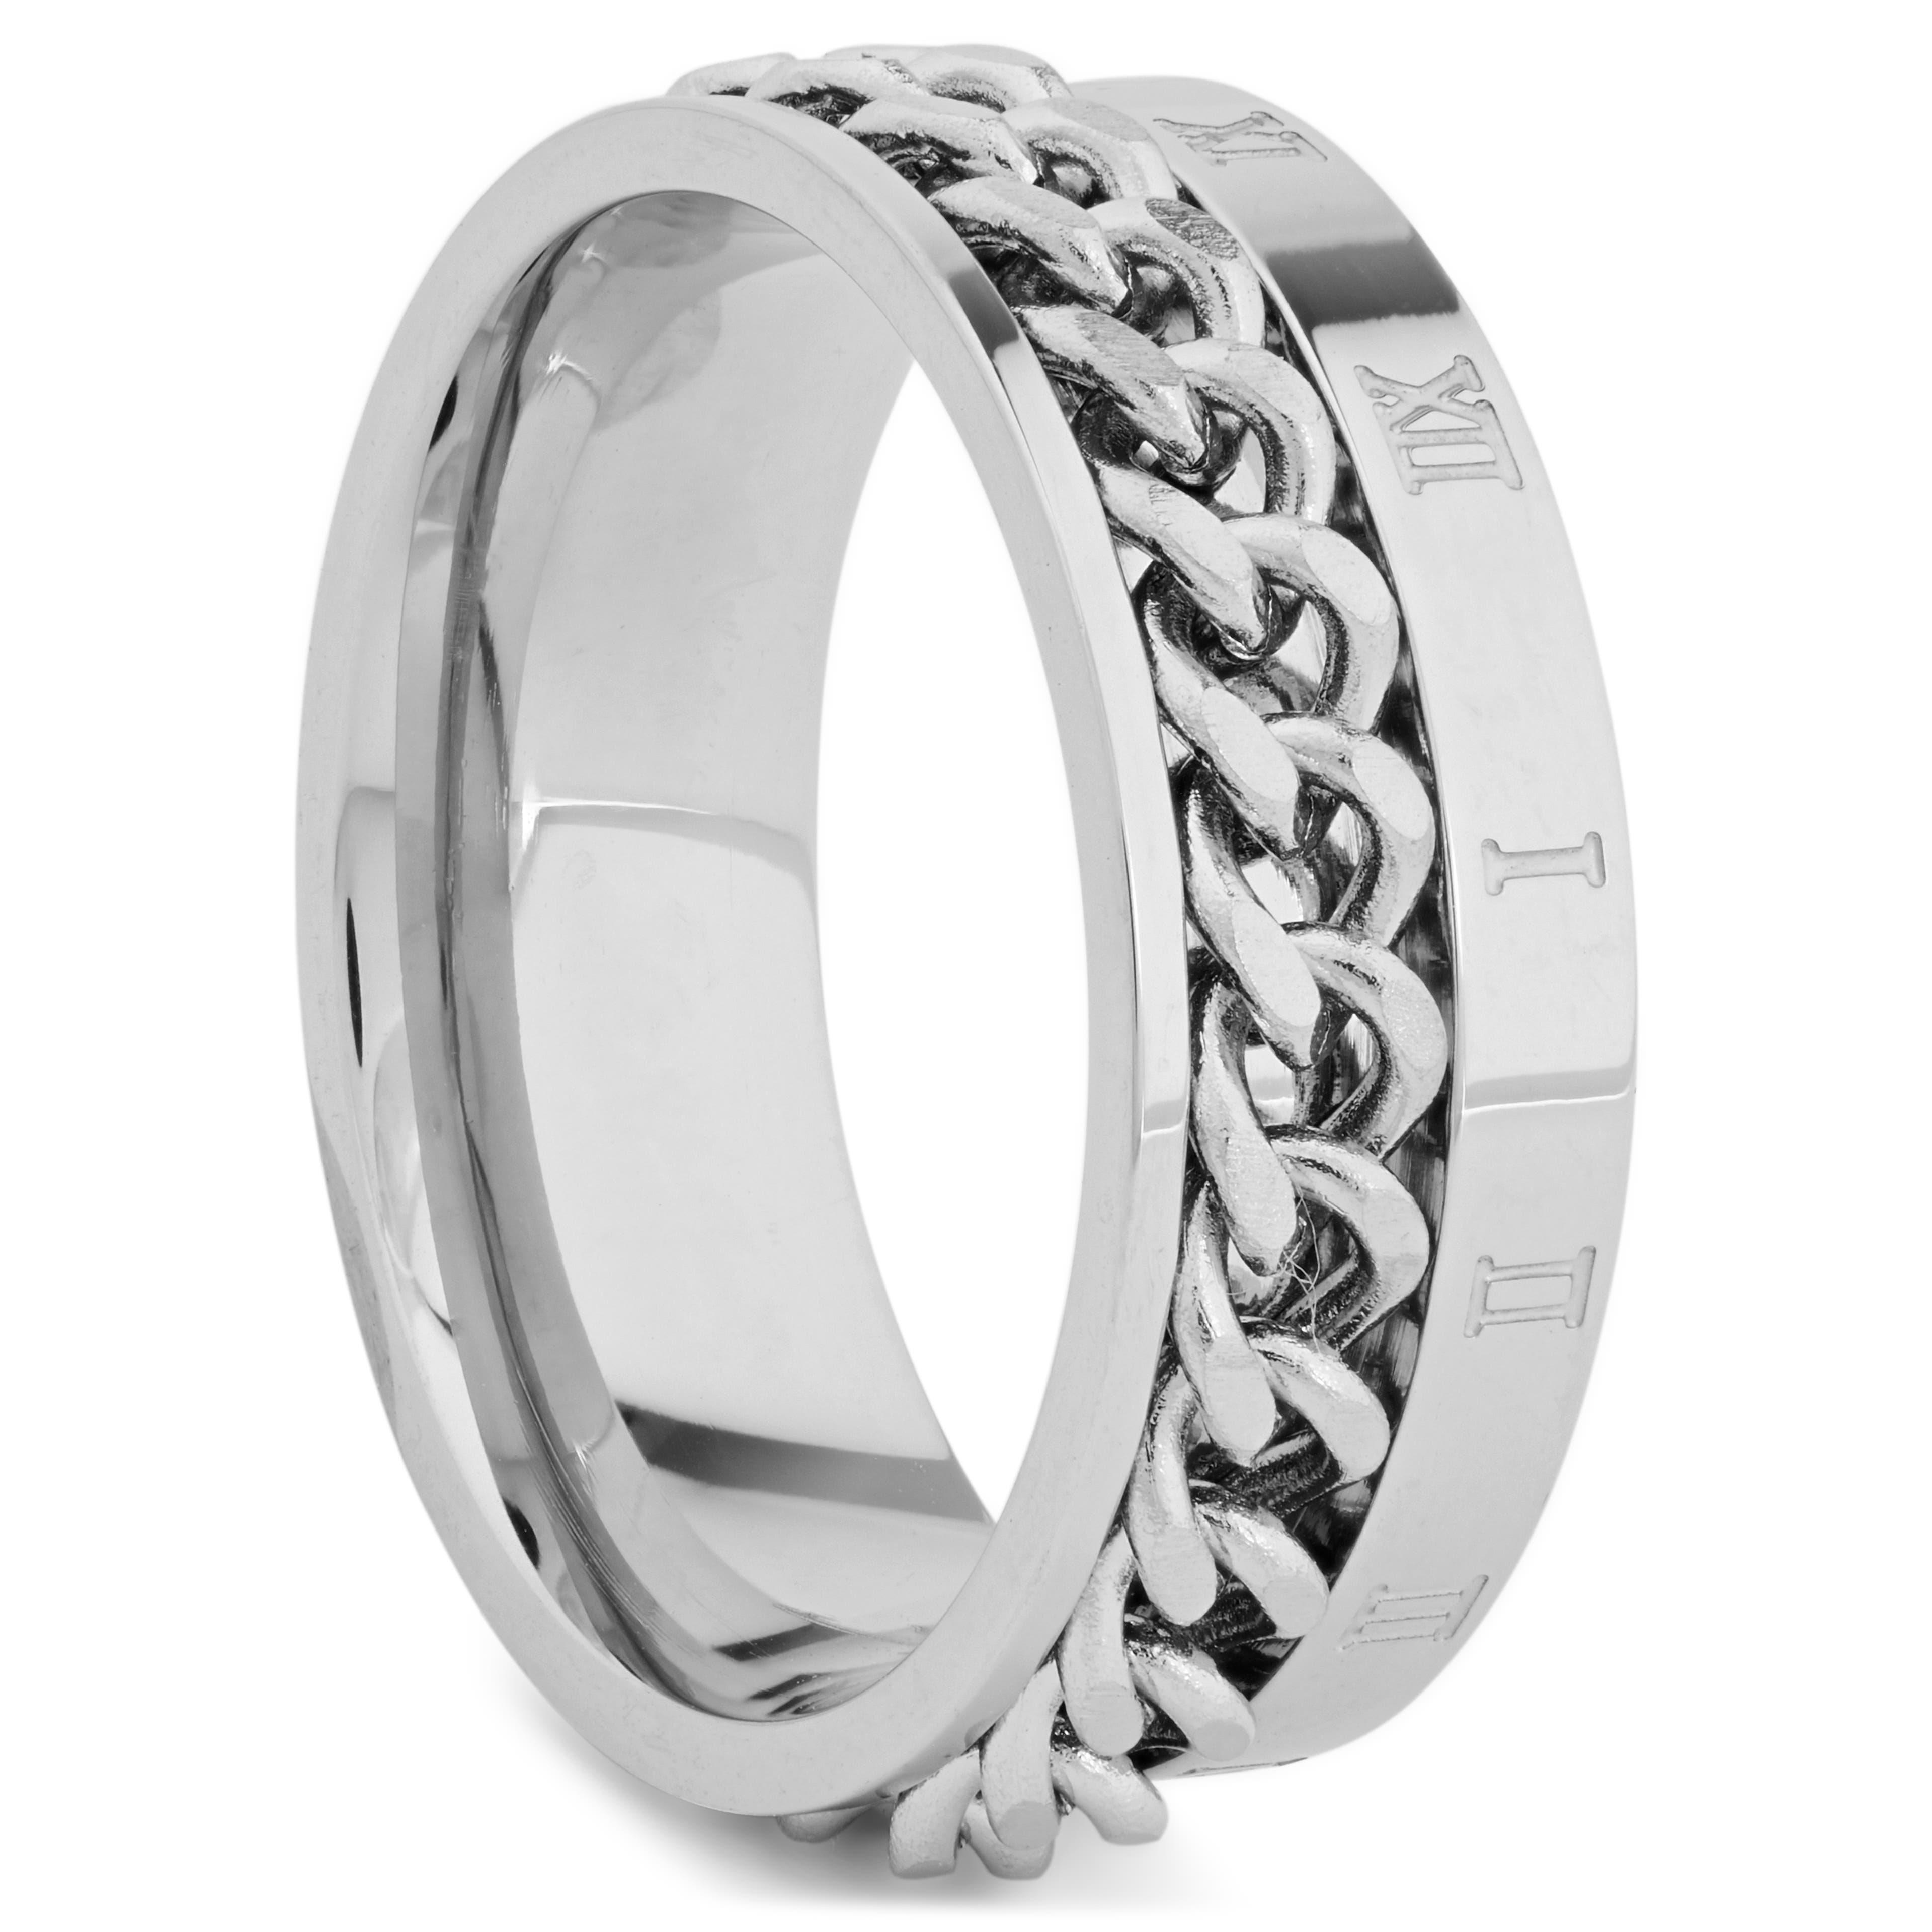 8 mm Silver-Tone Stainless Steel With Chunky Chain & Roman Numerals Ring, In stock!